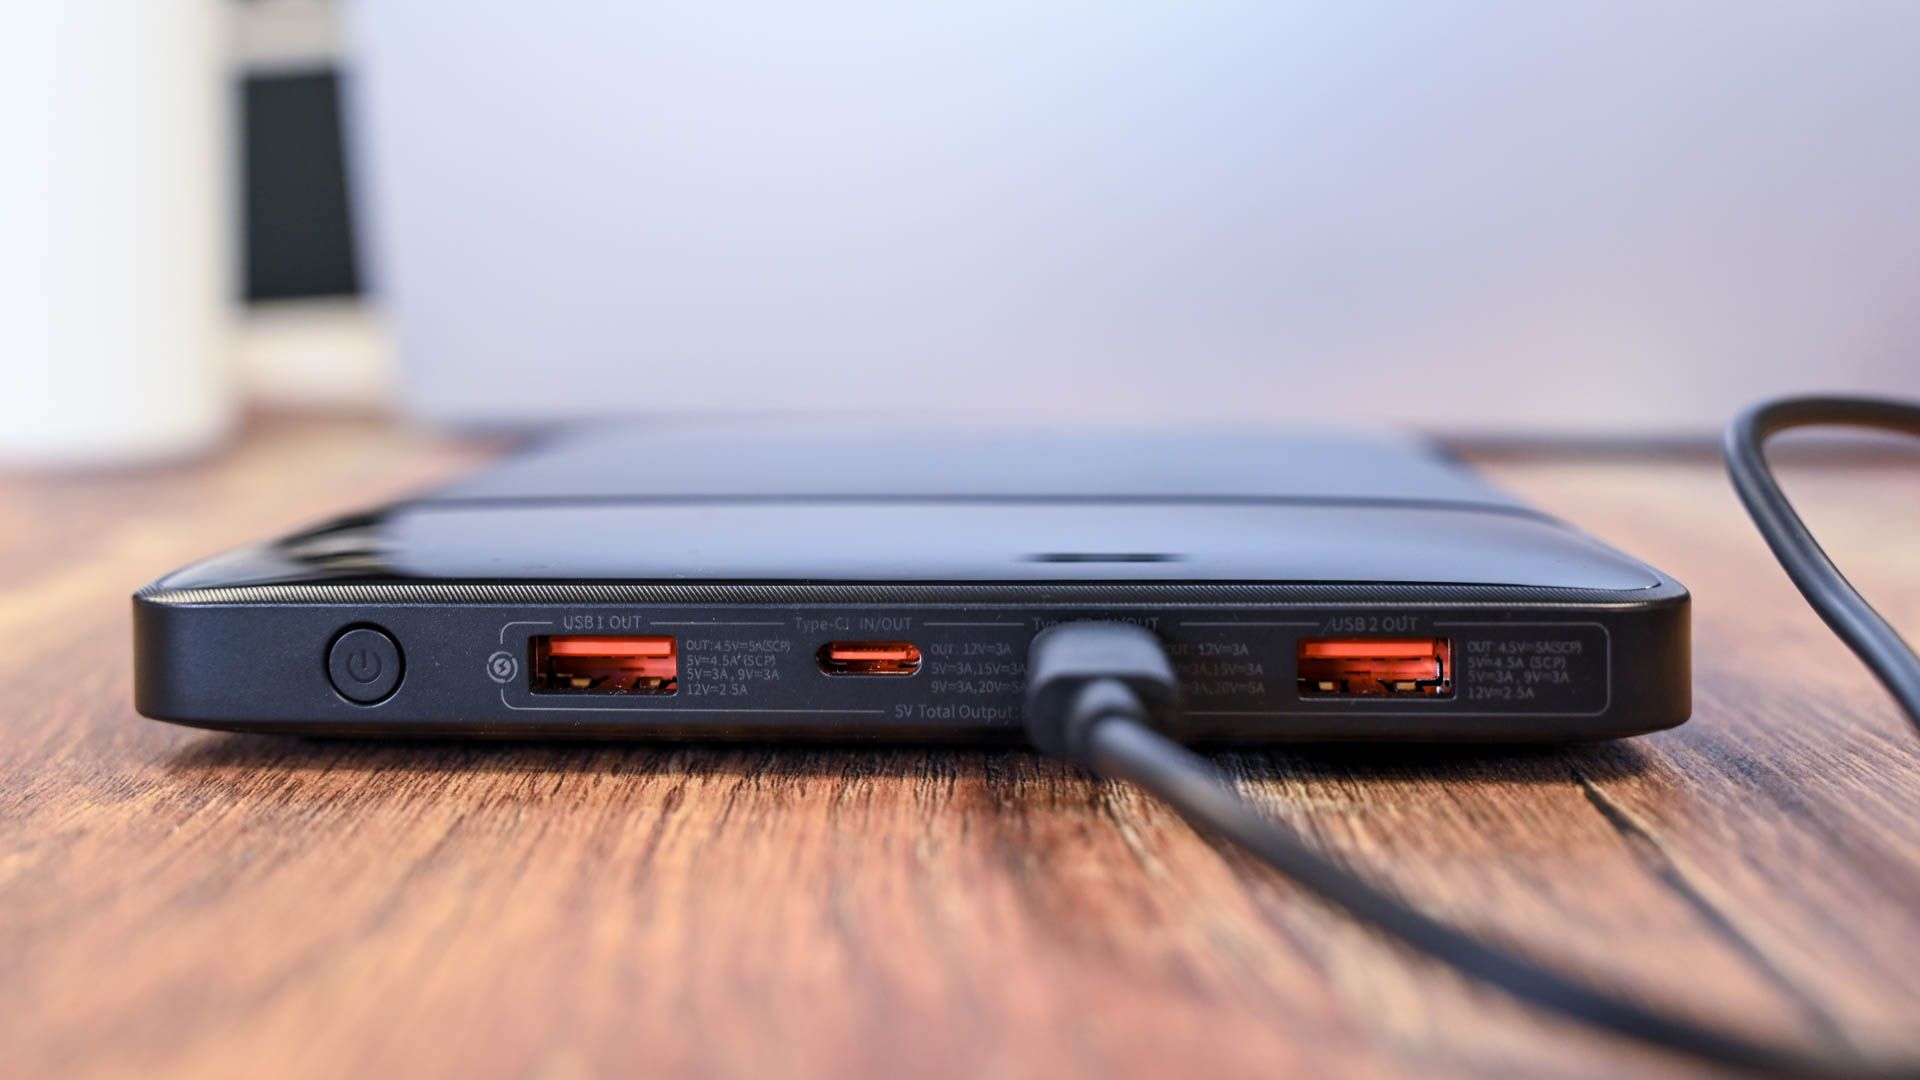 The charging ports of the Baseus 100W Laptop Power Bank.